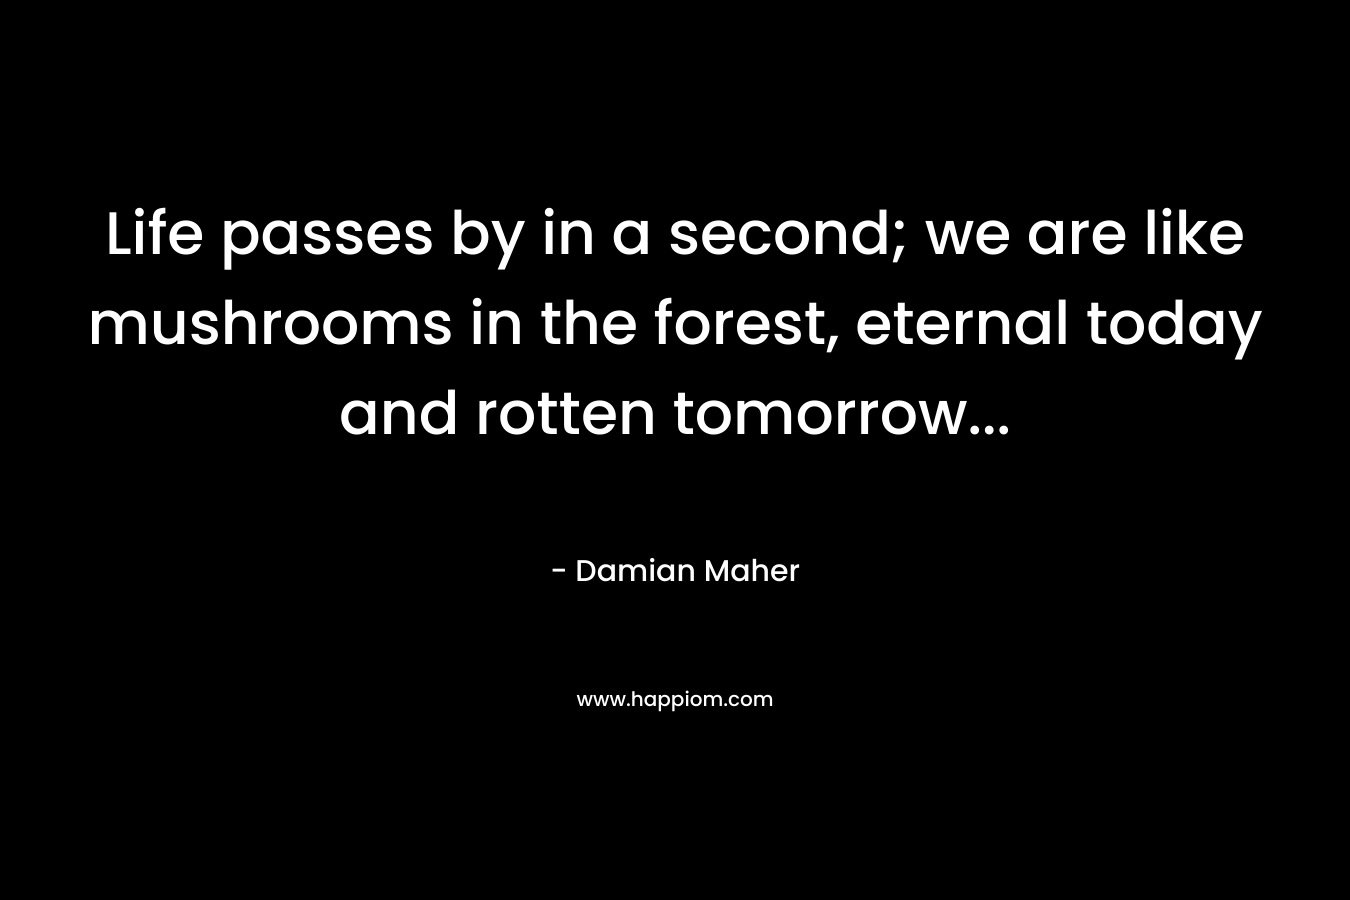 Life passes by in a second; we are like mushrooms in the forest, eternal today and rotten tomorrow...